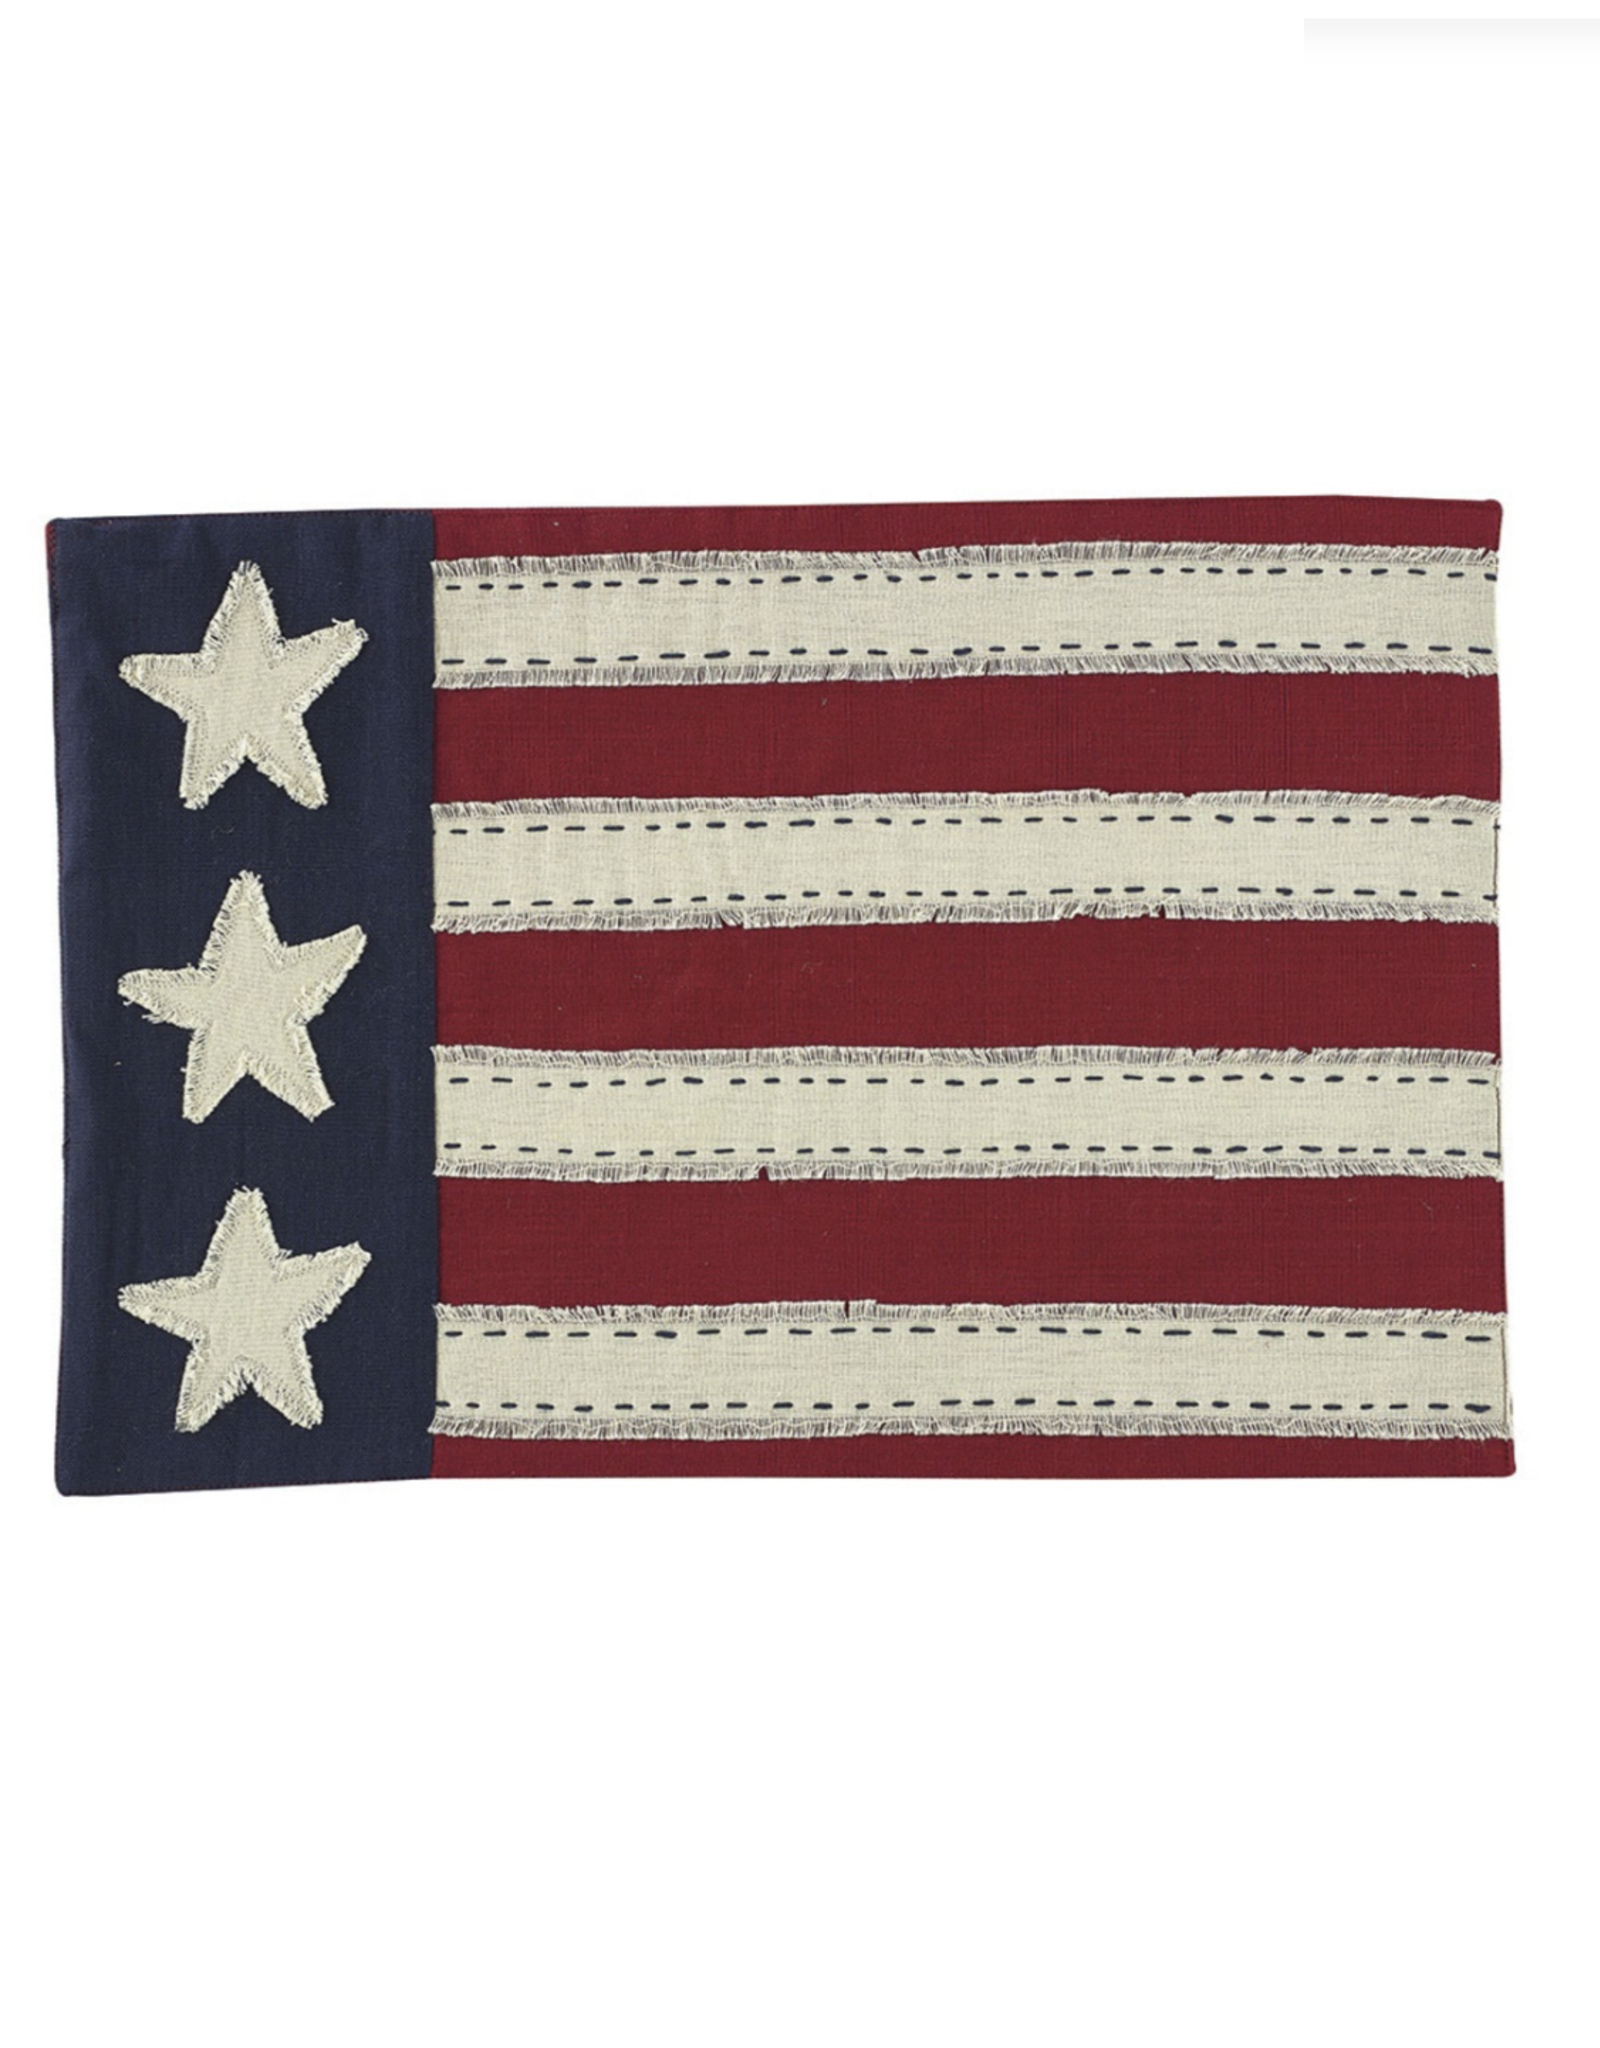 Park Designs Placemat - Star Spangled